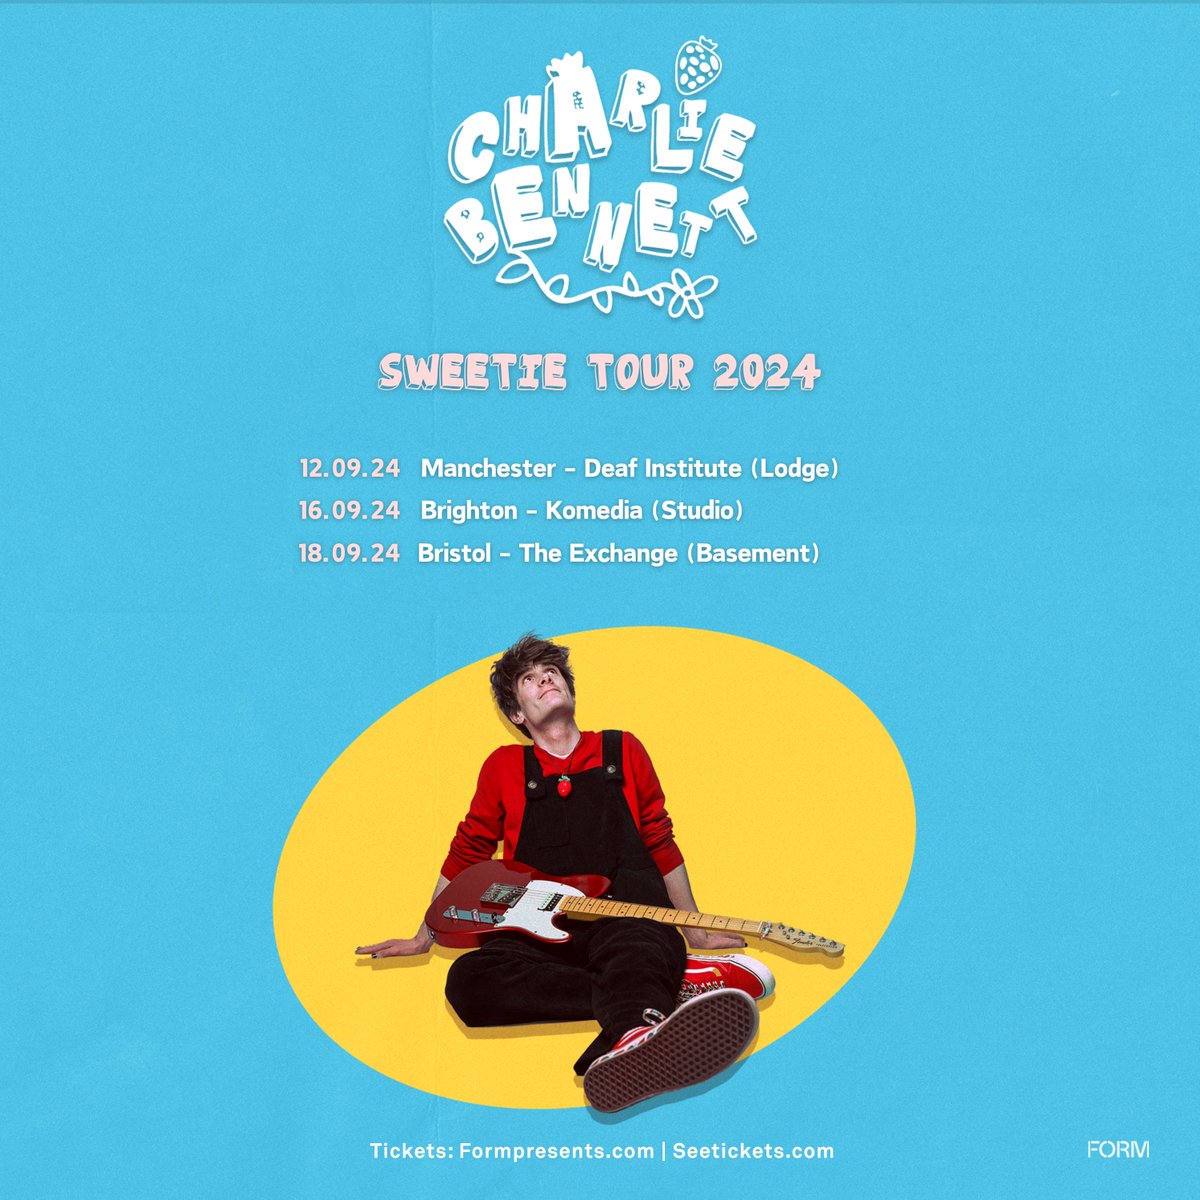 23-year-old indie/bedroom-pop artist @charlieb3nn3tt is heading on tour across the UK this September! 🎟 Tickets on sale 9am Friday.